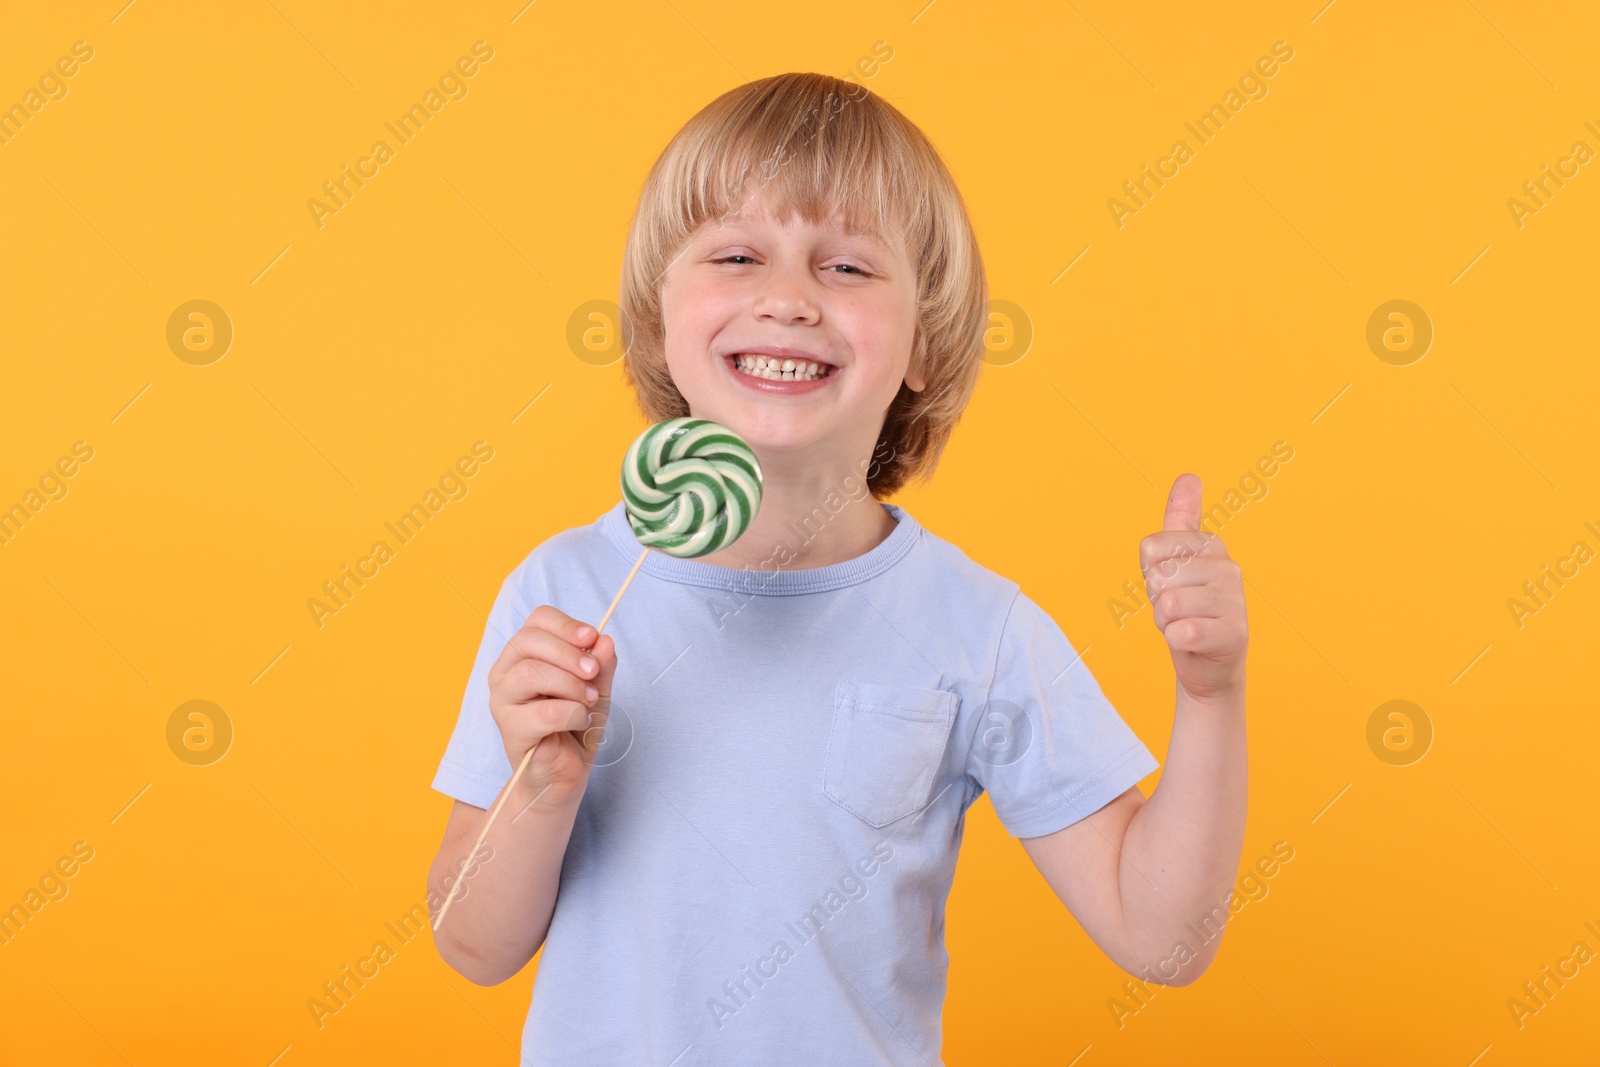 Photo of Happy little boy with bright lollipop swirl showing thumbs up on orange background